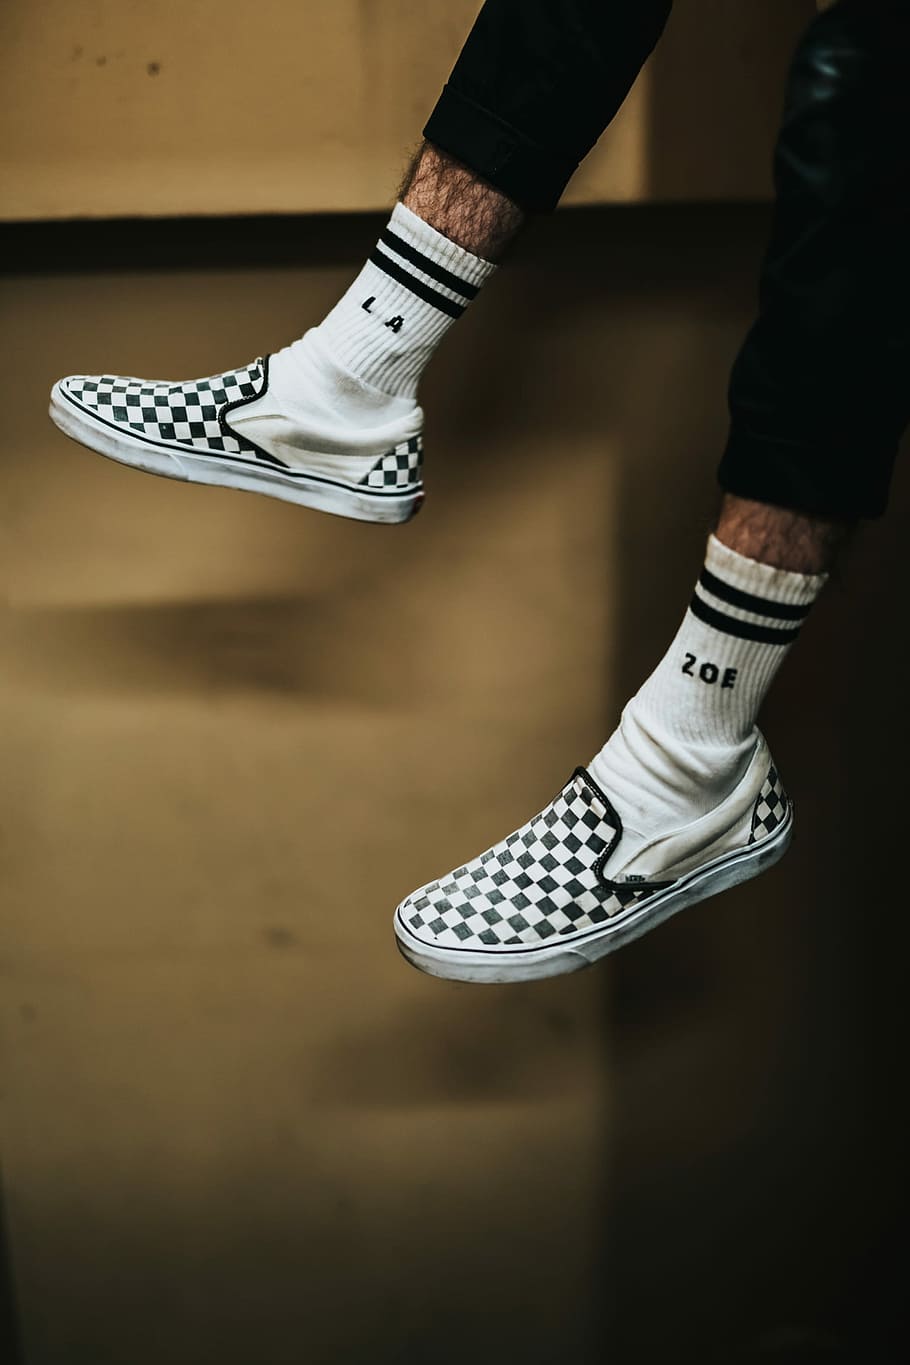 person wearing white-and-black checked slip-on shoes, person wearing pair of white-and-black Vans low-top sneakers